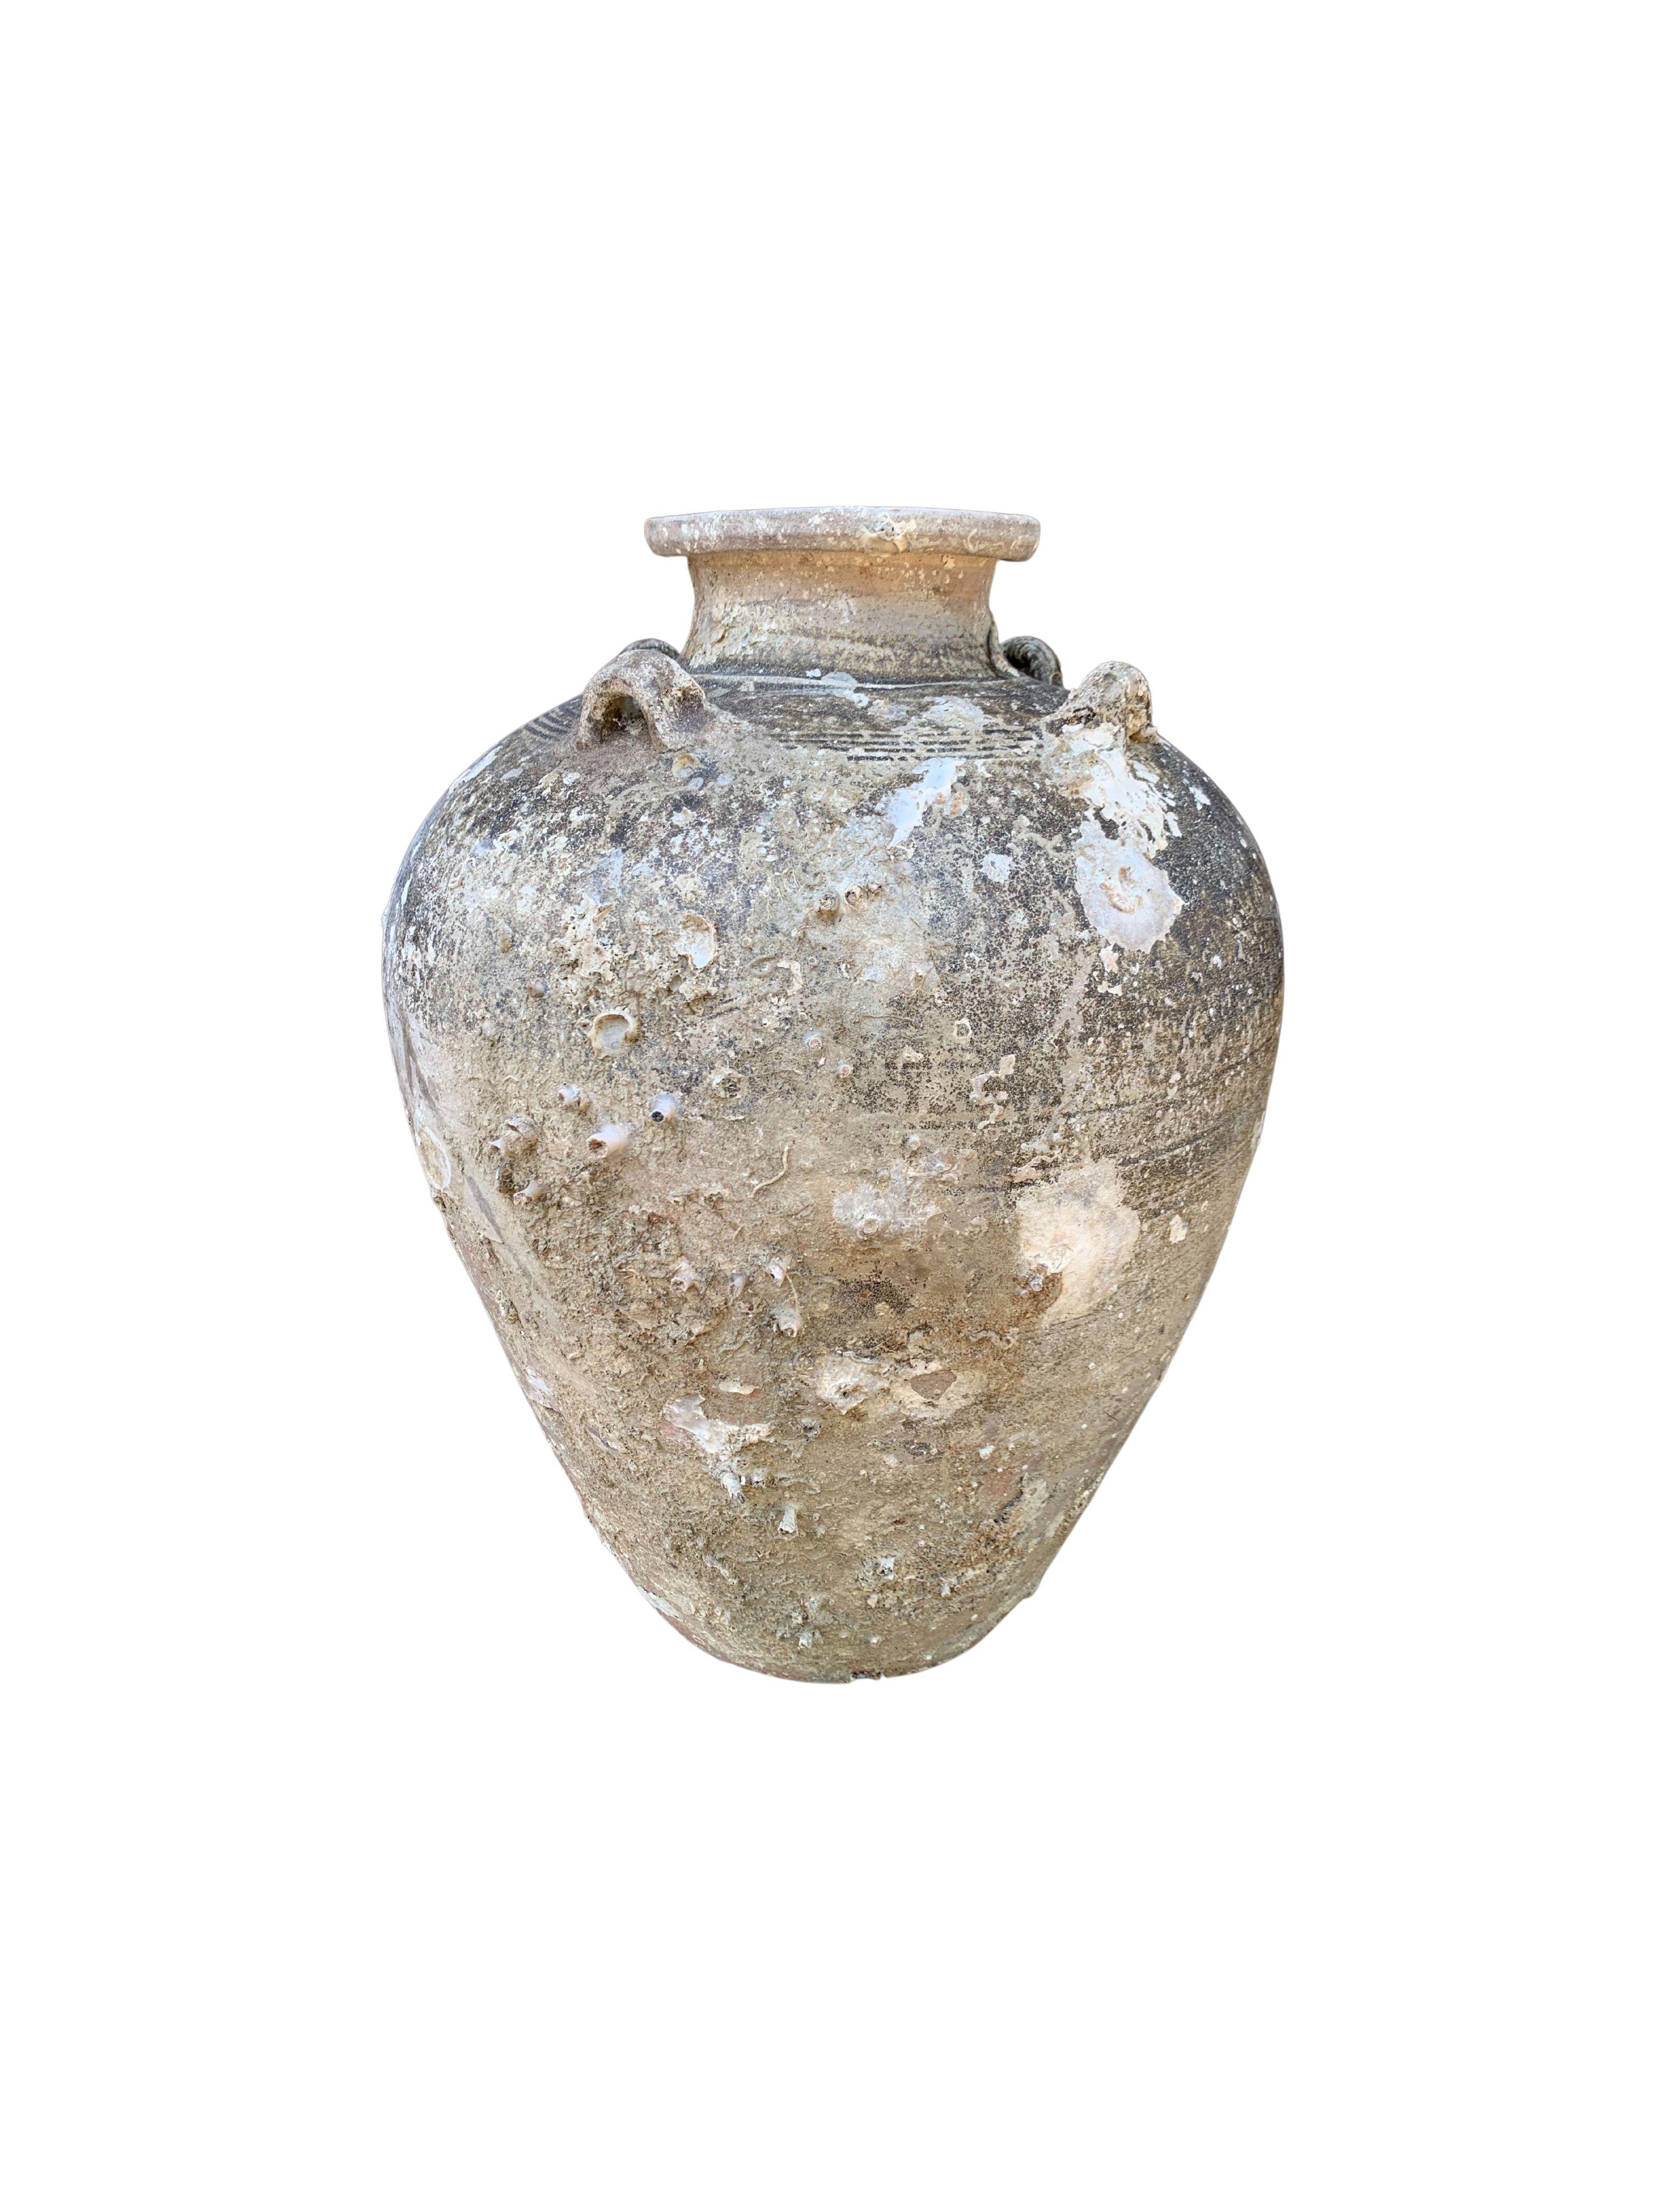 A wonderful example of a 16th Century Sawankhalok jar from a Shipwreck off the Coast of the Indonesian Island of Batam. Batam was one of the most substantial and influential ports in the South China Sea where an abundance of trade was conducted.